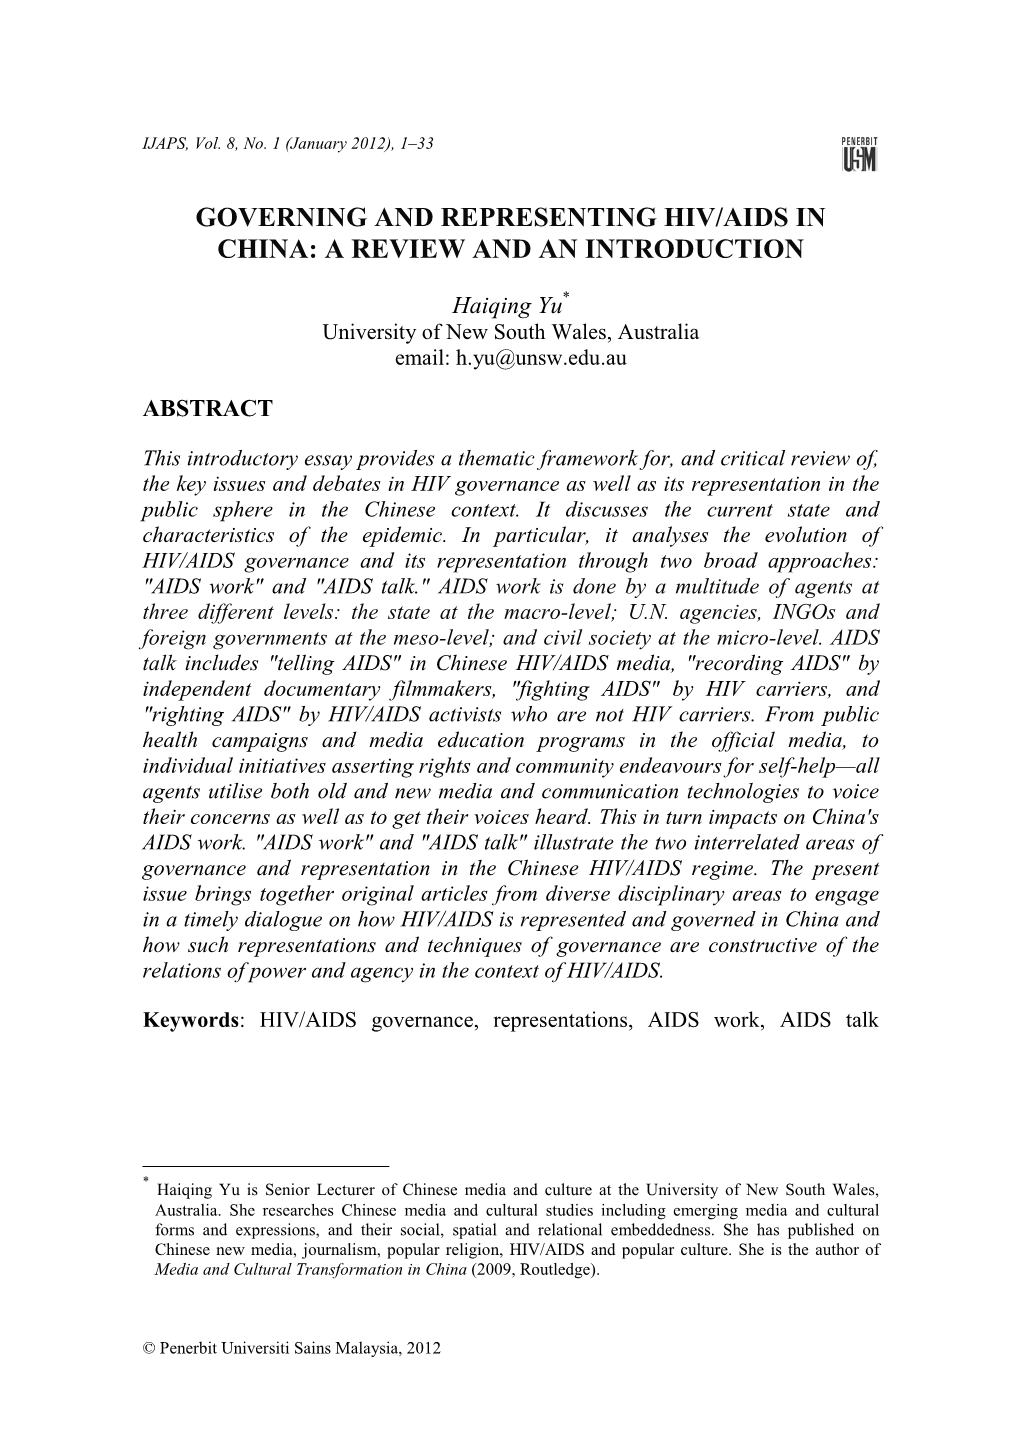 Governing and Representing Hiv/Aids in China: a Review and an Introduction